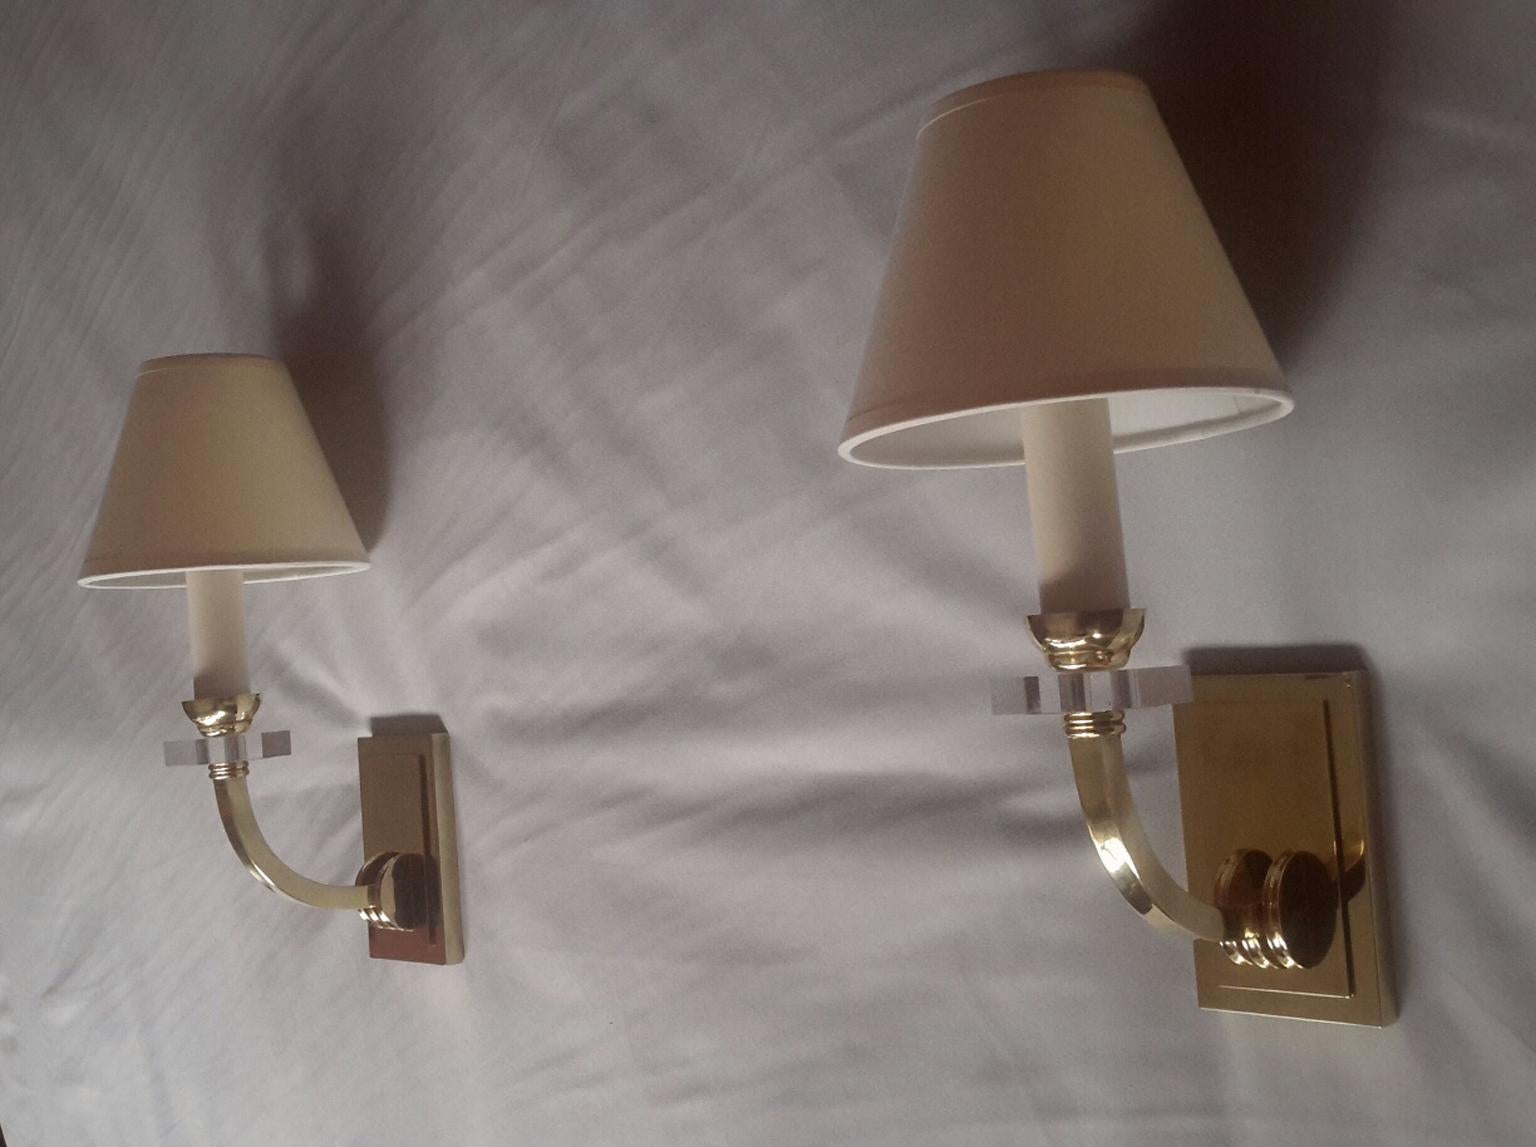 Very elegant pair of gilt bronze and Lucite glass wall sconces in the French neoclassical style of the mid-1950s by Jacques Adnet.
The sconces are in very good condition, new wired and suitable for US standards. (40 watts maxi per shade).
The white